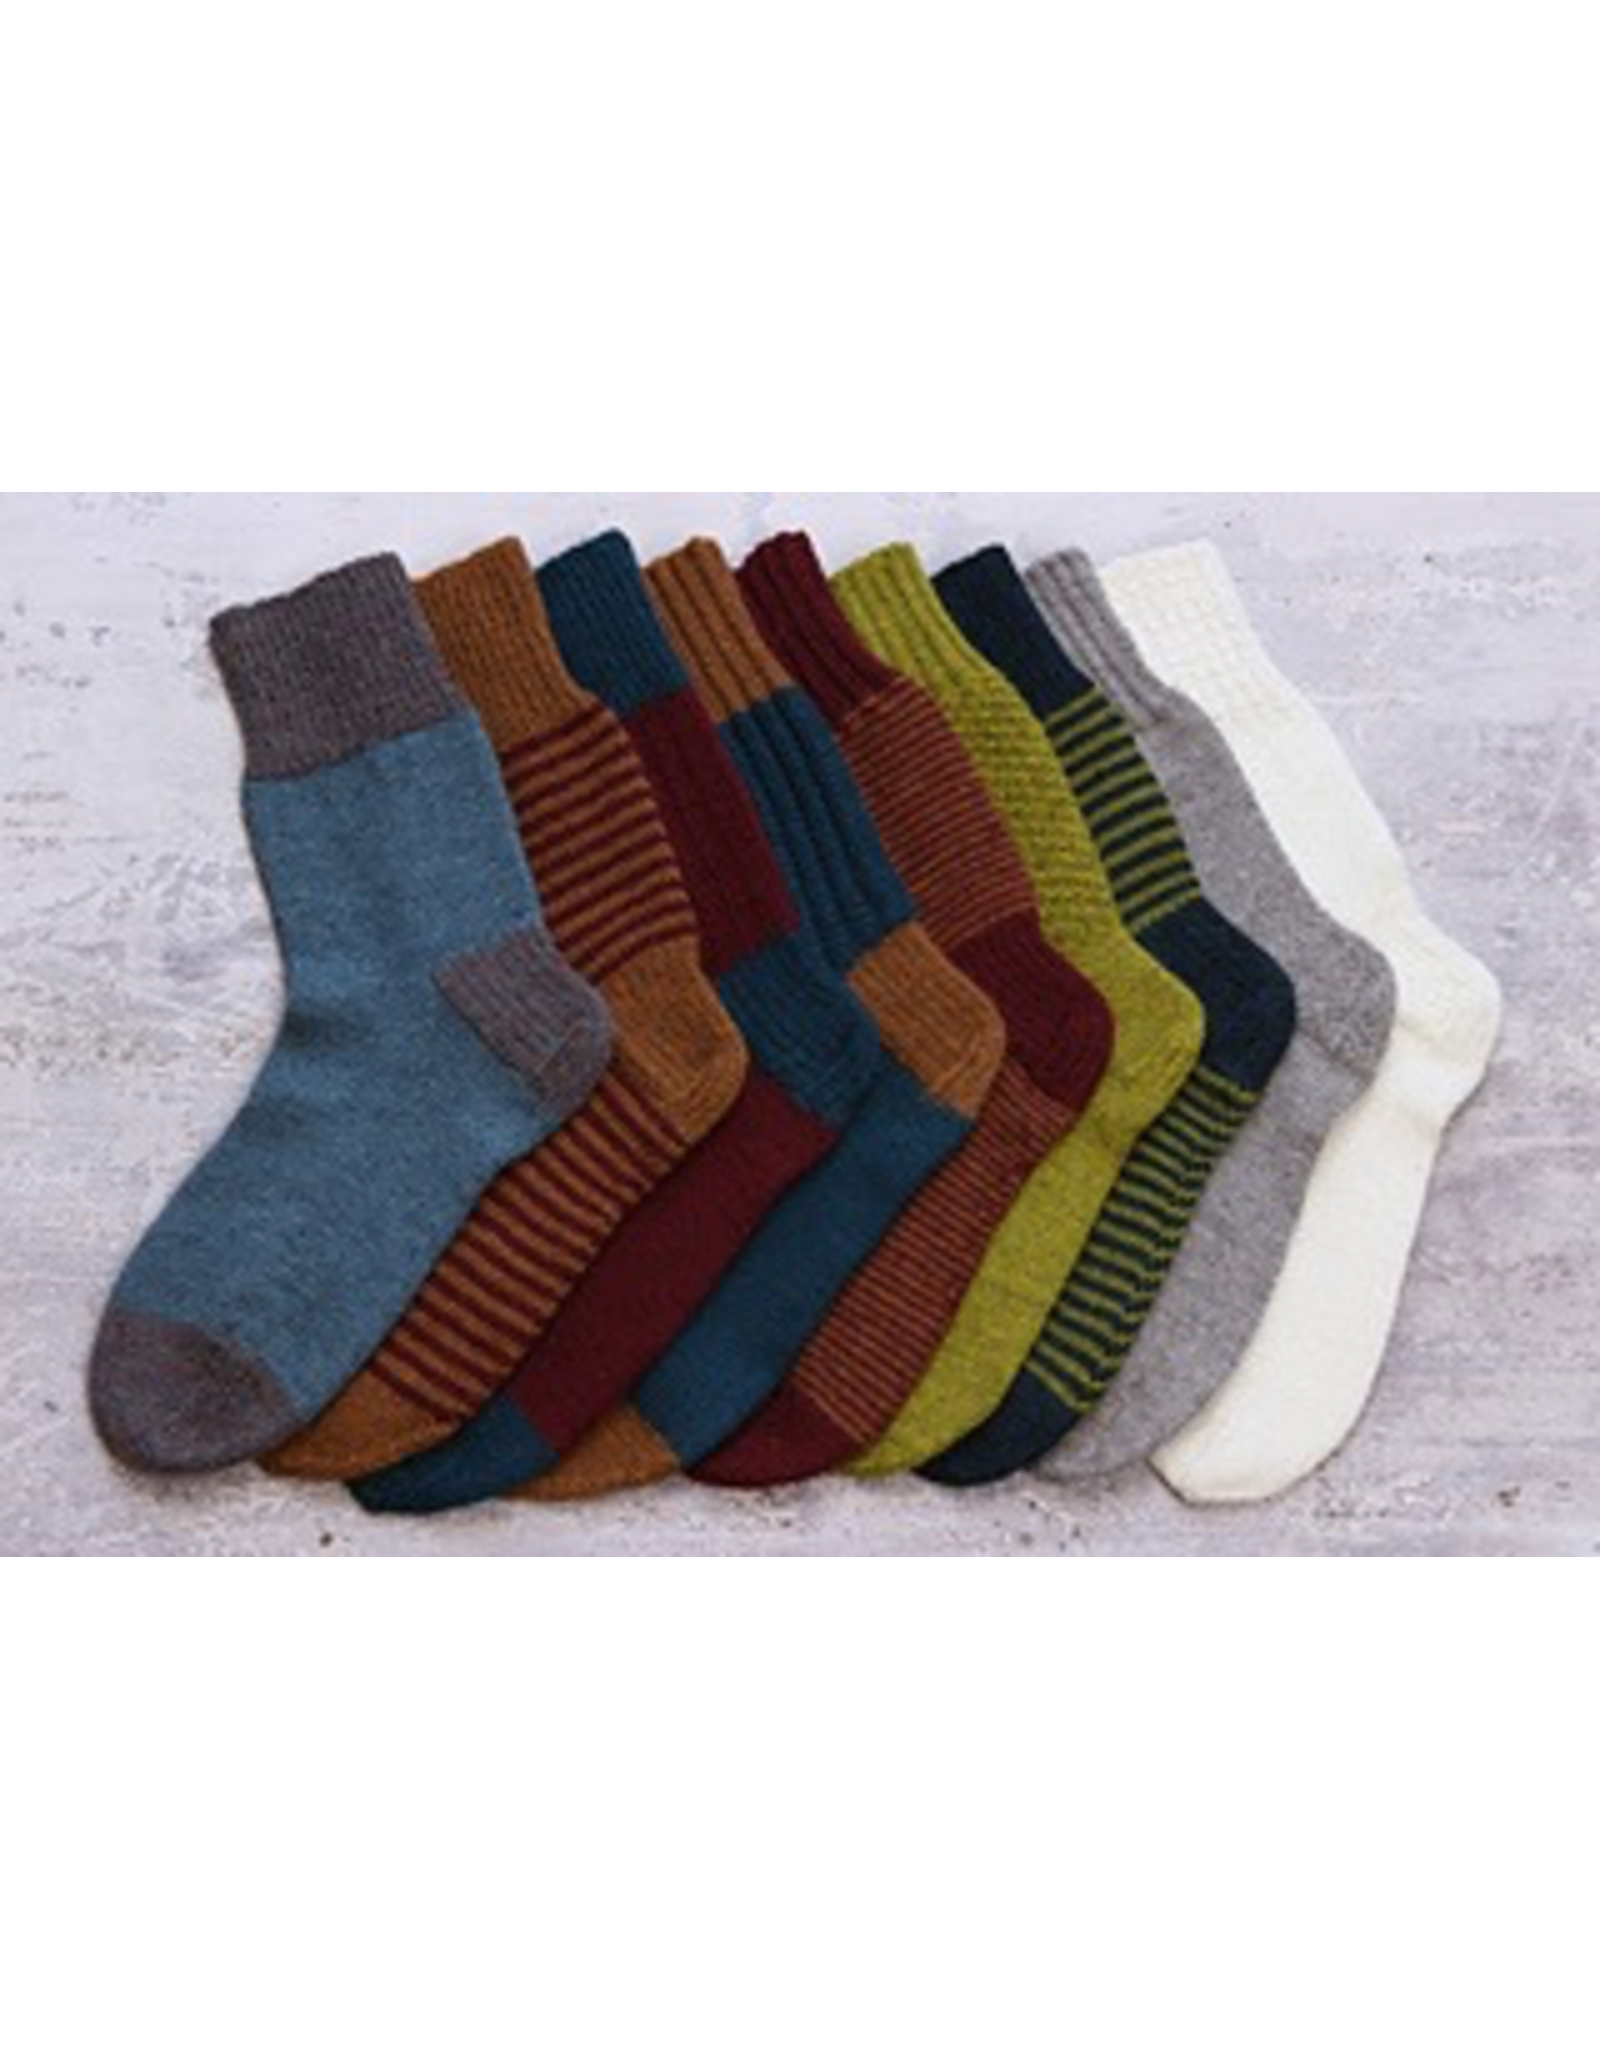 The Fibre Co. One Sock Guidebook